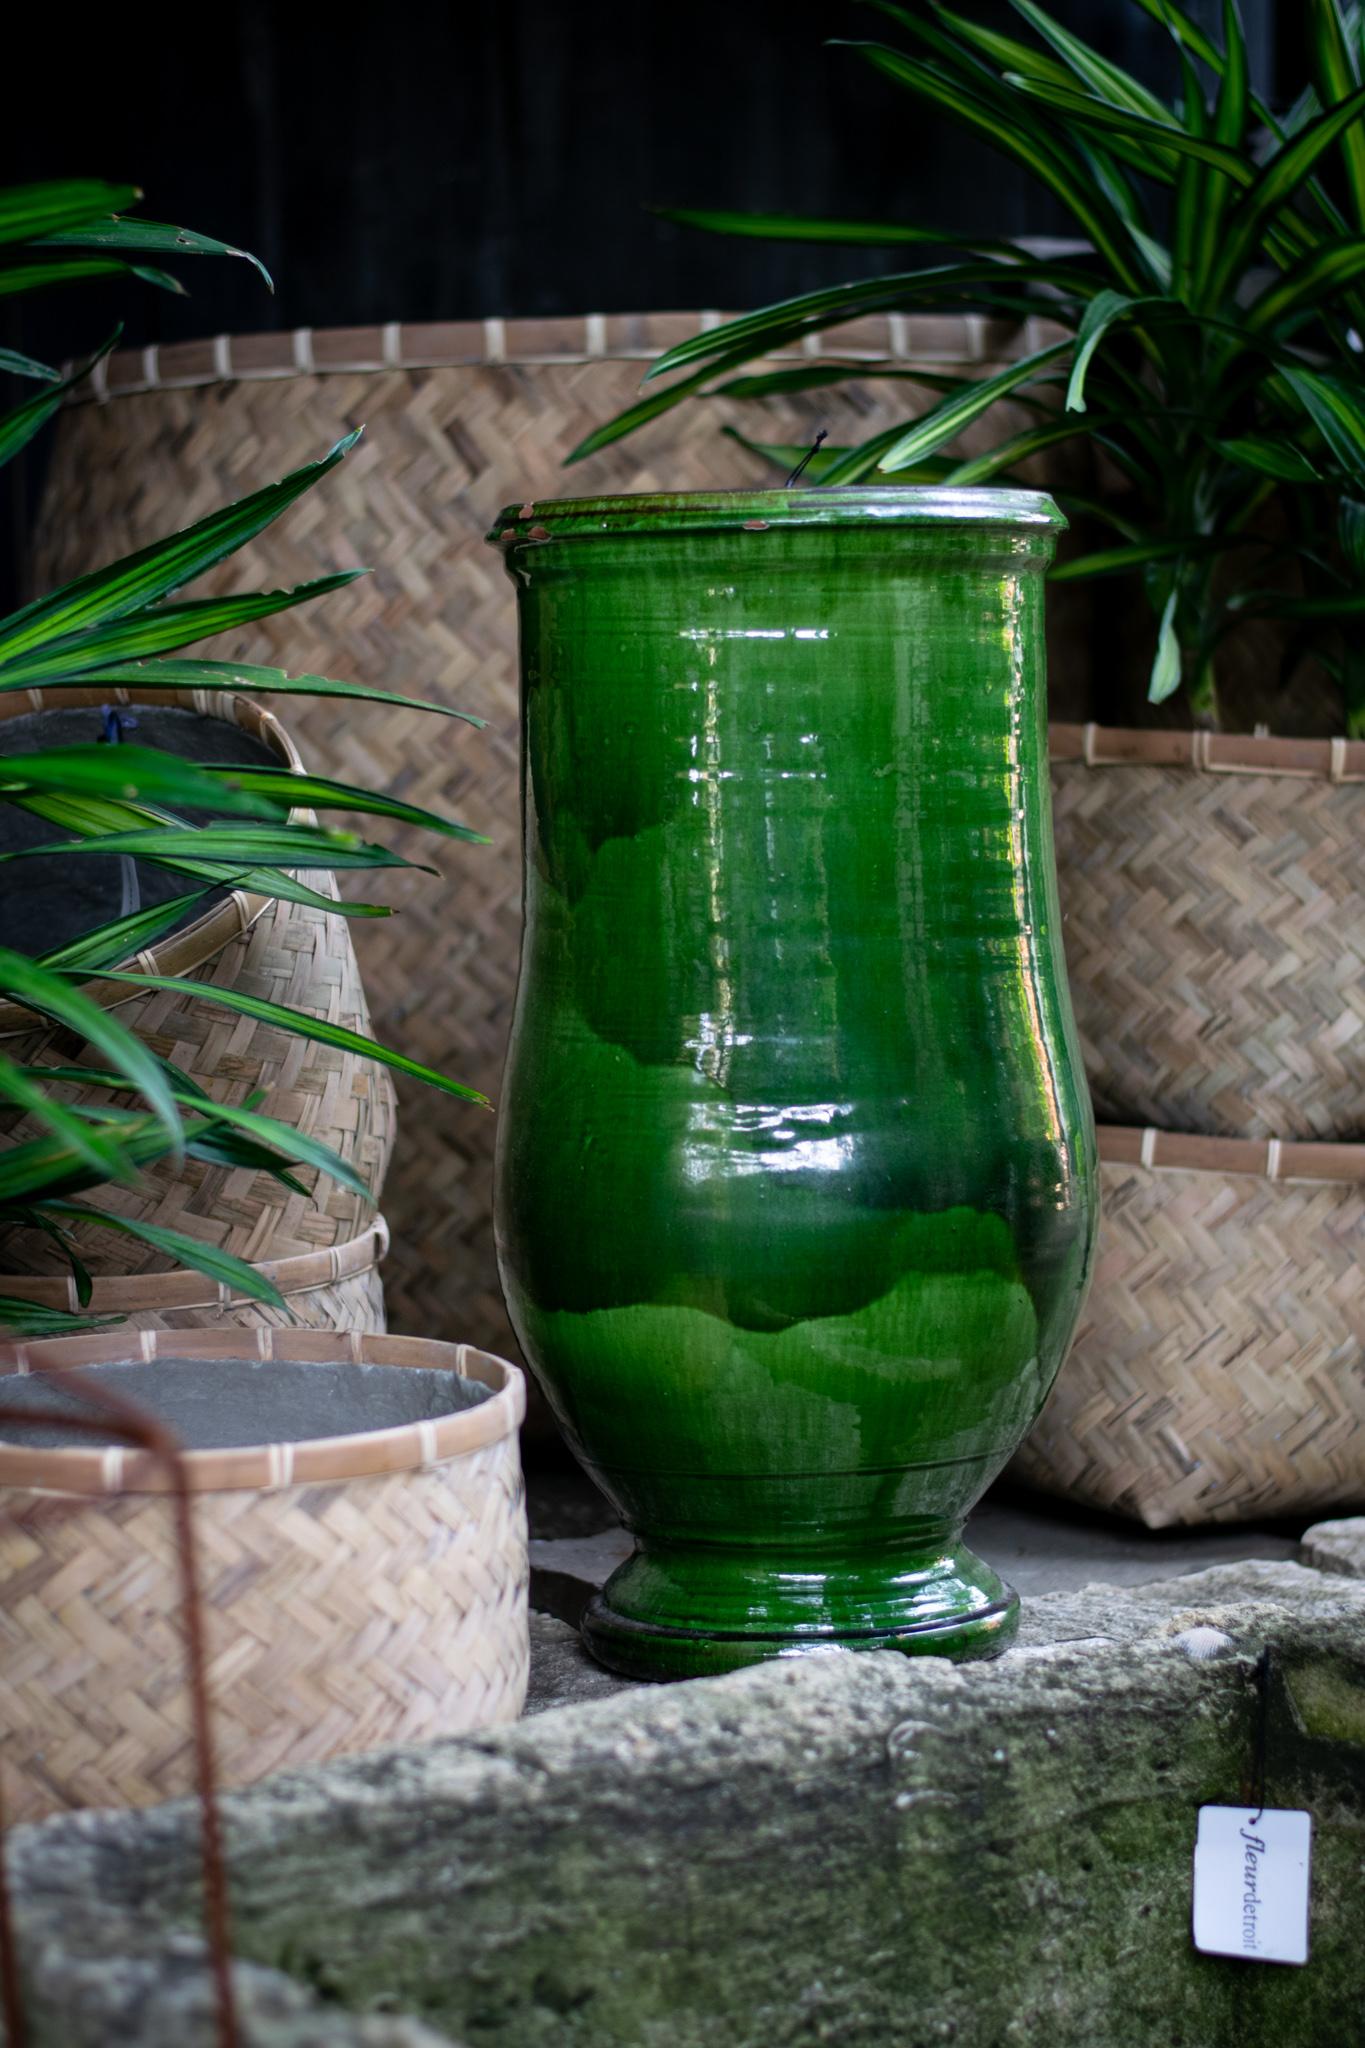 A triumphant nod to old world aesthetic, this contemporary oil jar is a fresh take on the classic look of the French garden. Featuring inconsistencies expected in handmade pottery and a one of a kind glaze in a striking green hue. A perfect addition